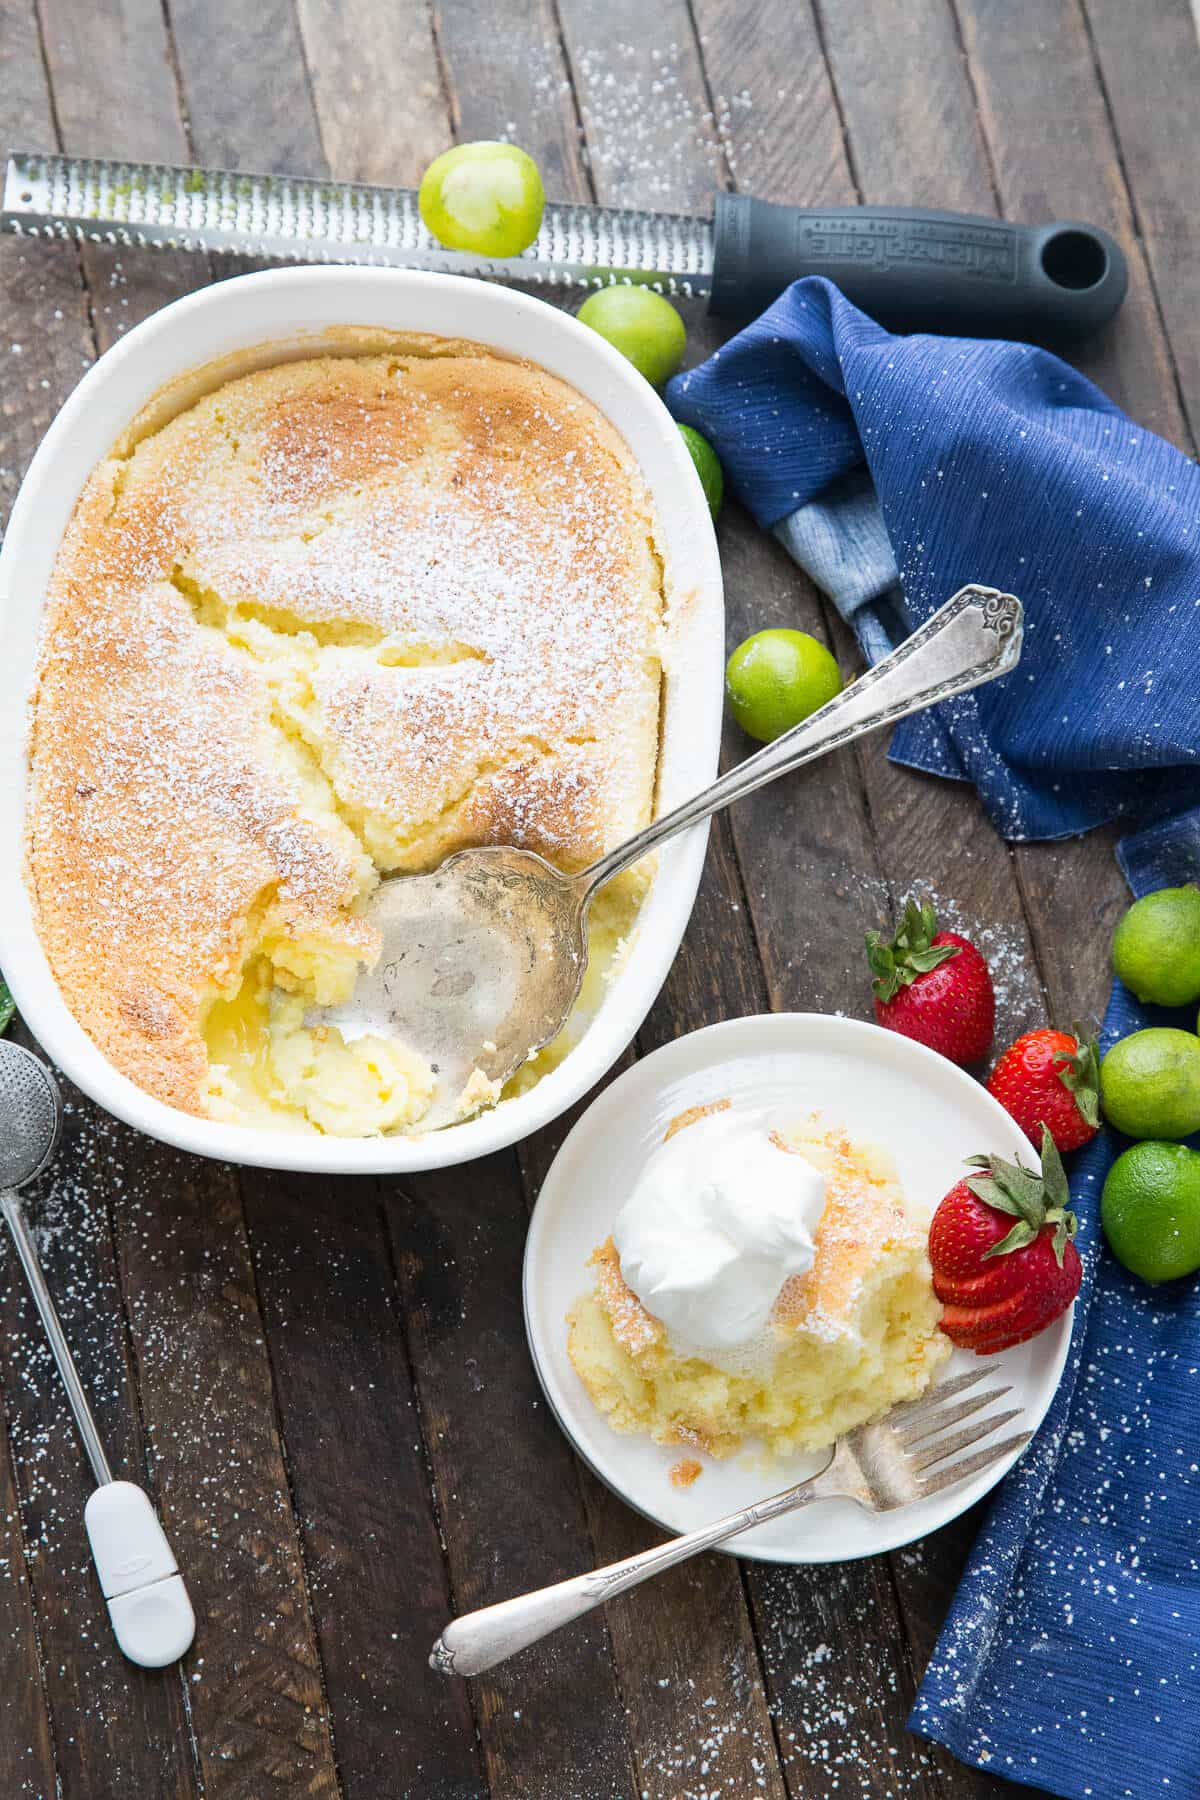 This pudding cake is such a simple recipe and that key lime flavor is divine!